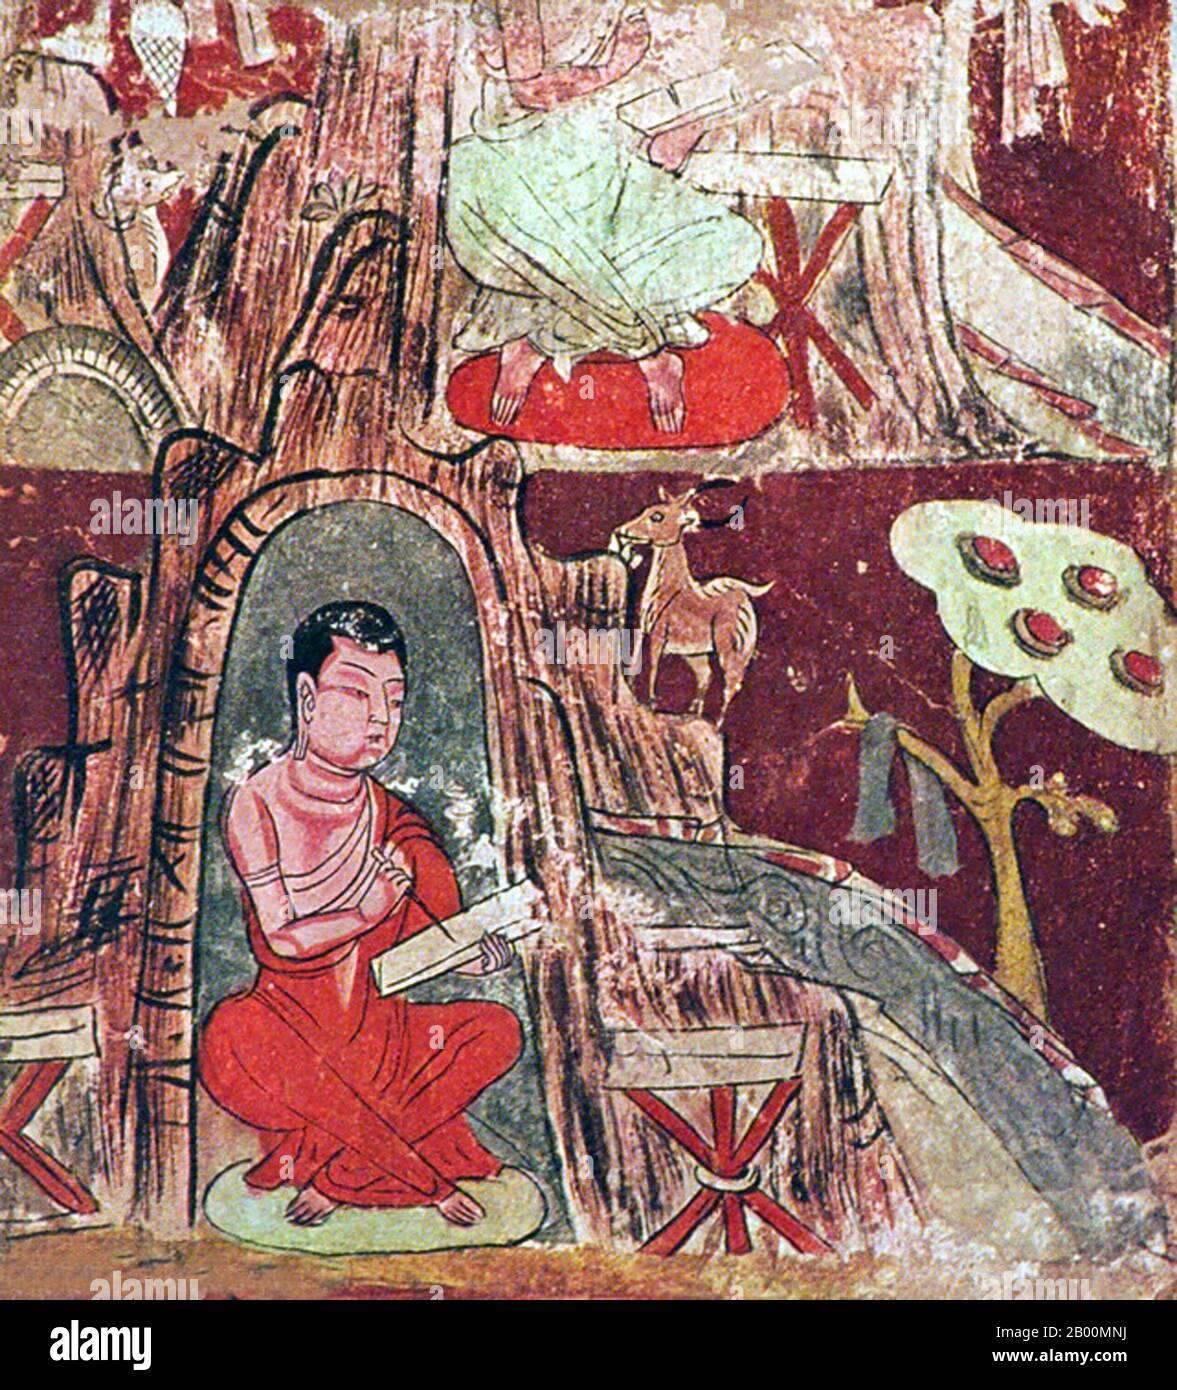 China: A Buddhist monk transcribing scriptures. Mural from the Qigexing Caves, Xinjiang.  The Qigexing Buddhist Temple Ruins (Uyghur: Xorquᶄ, Chinese: Qīgè Xīng Fúsì Yízhǐ; literally ‘Seven-Stars Buddhist Temple Ruins’) is a ruined compound of Buddhist religious sites located about 25–30 km southwest of the town of Yanqi, Yanqi Hui Autonomous County, Xinjiang, China.  Qigexing was part of the ancient Buddhist Karashara Kingdom that is first mentioned in Chinese sources from the Han Dynasty as the Kingdom of Yanqi. In 94 CE, Qigexing was conquered by the Han Dynasty in its reconquest of the Tar Stock Photo